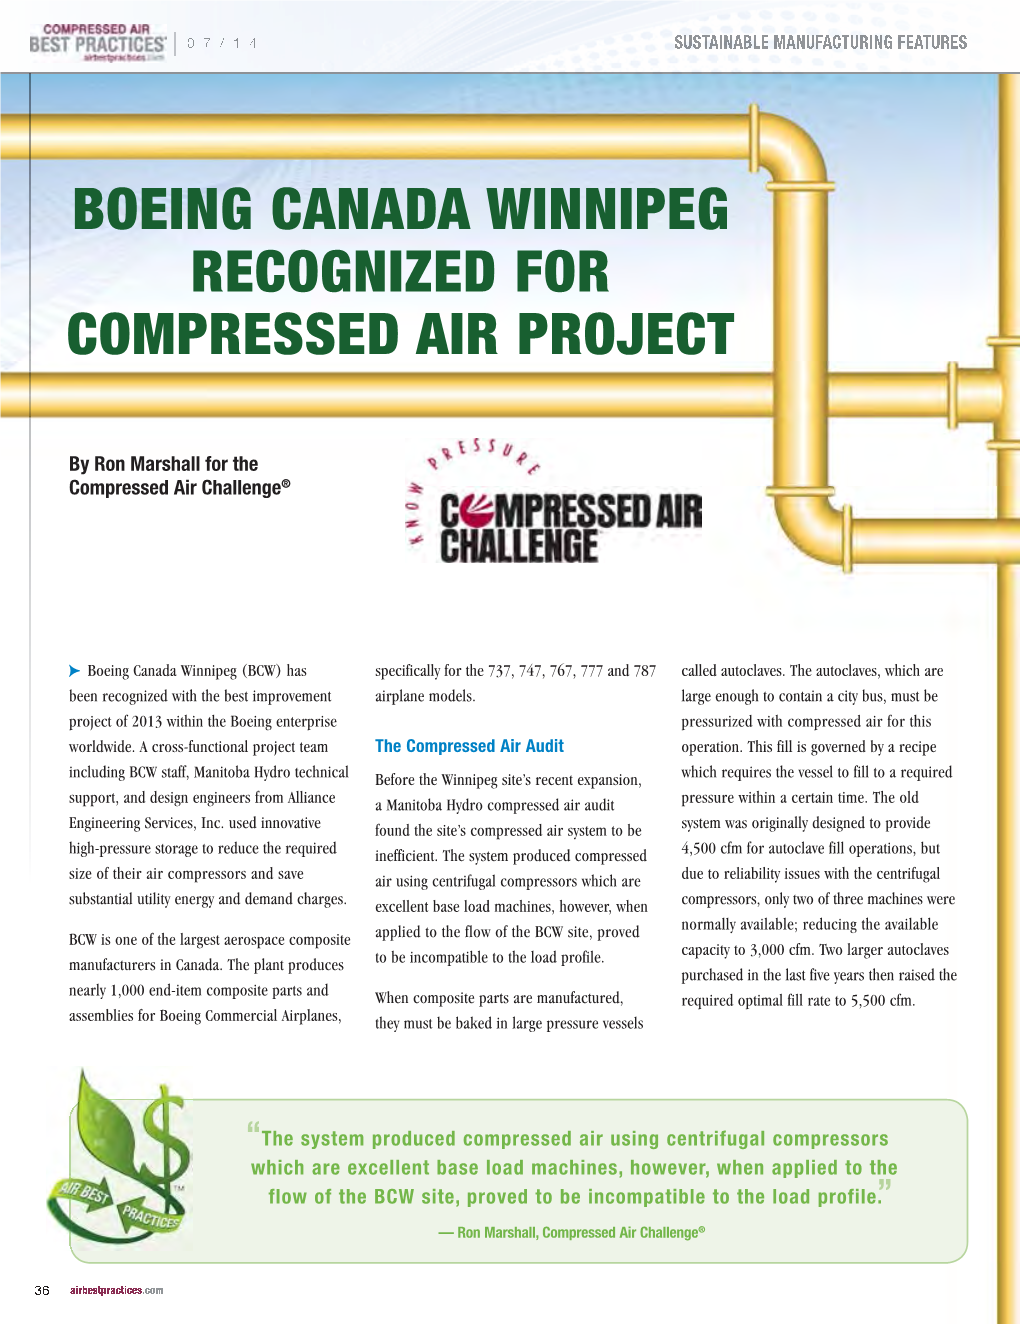 Boeing Canada Winnipeg Recognized for Compressed Air Project